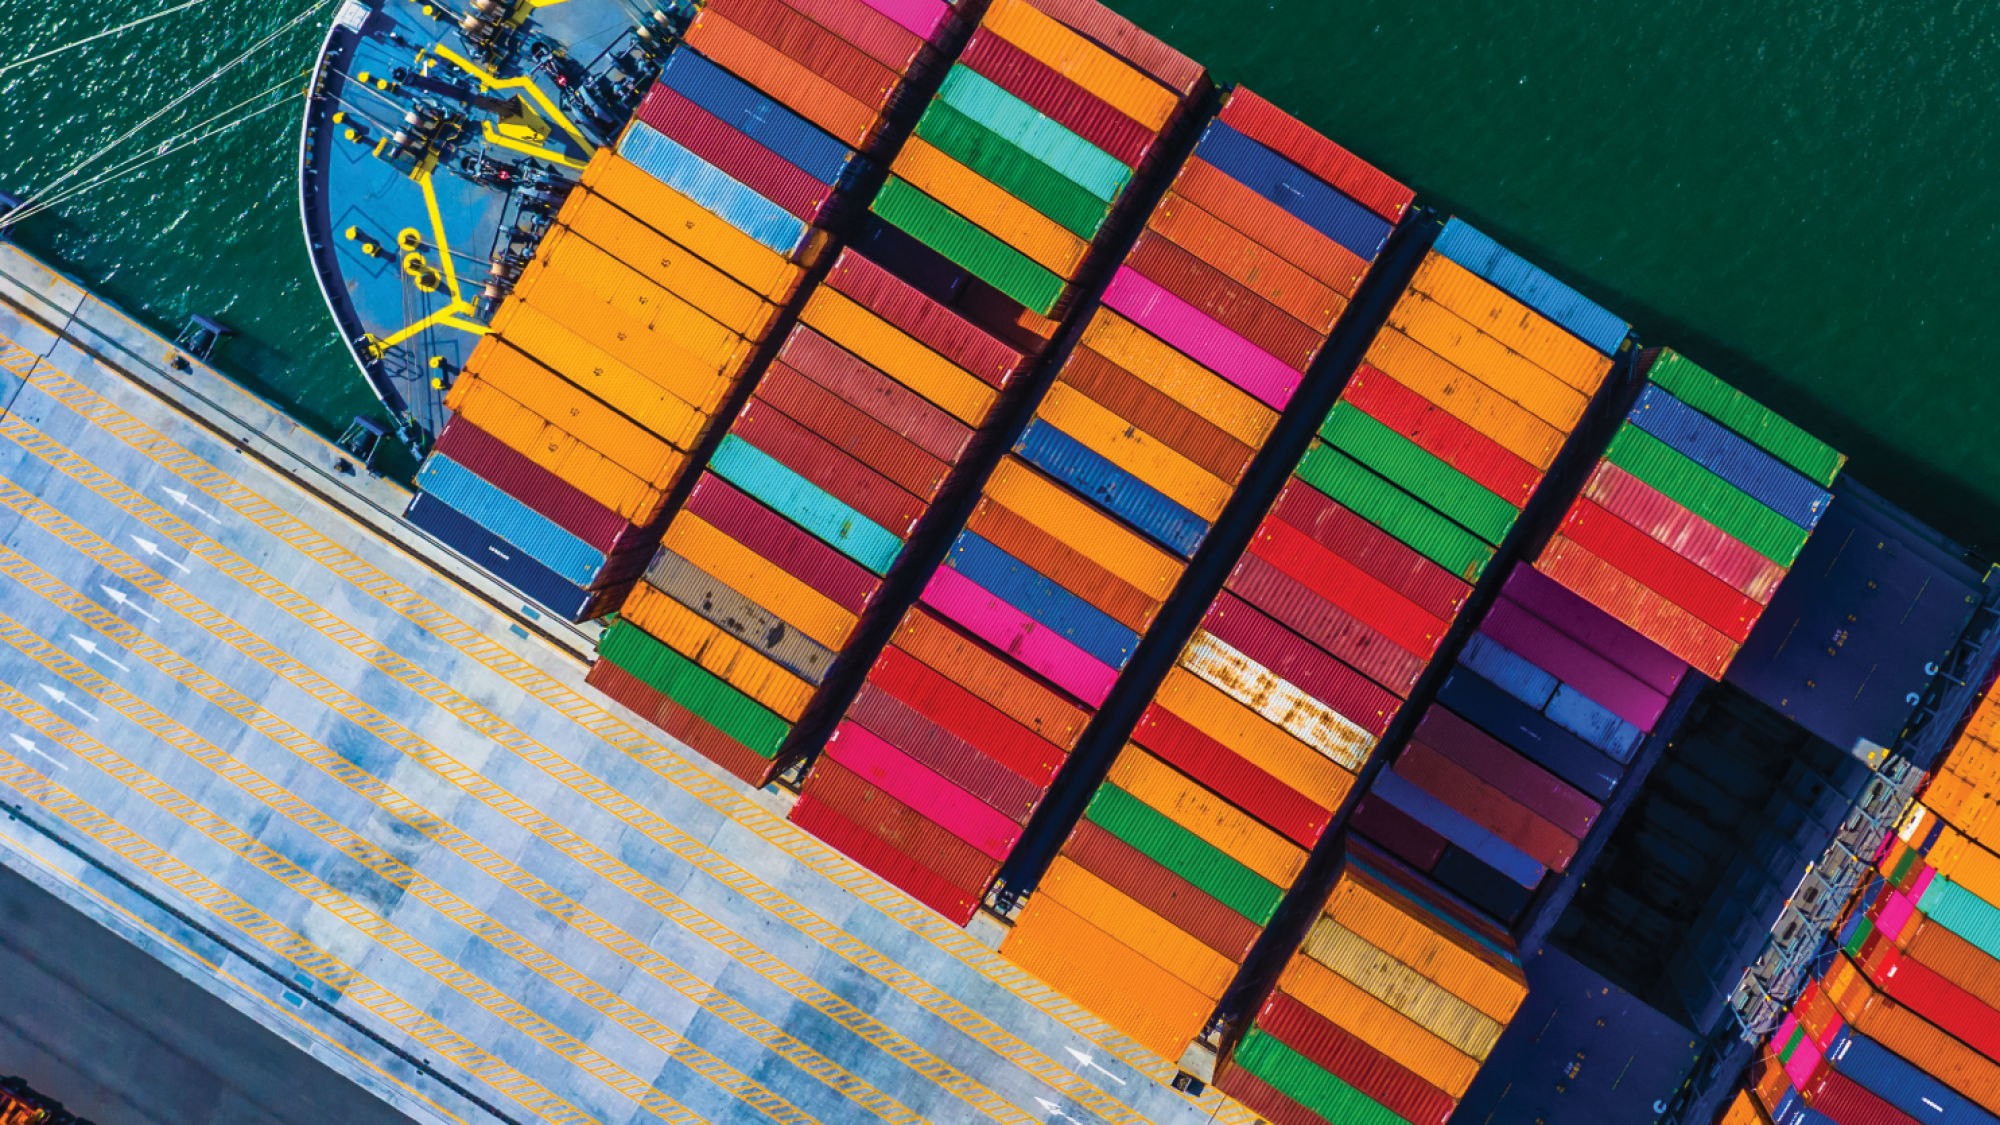 An aerial view of a cargo ship carrying colorful shipping containers